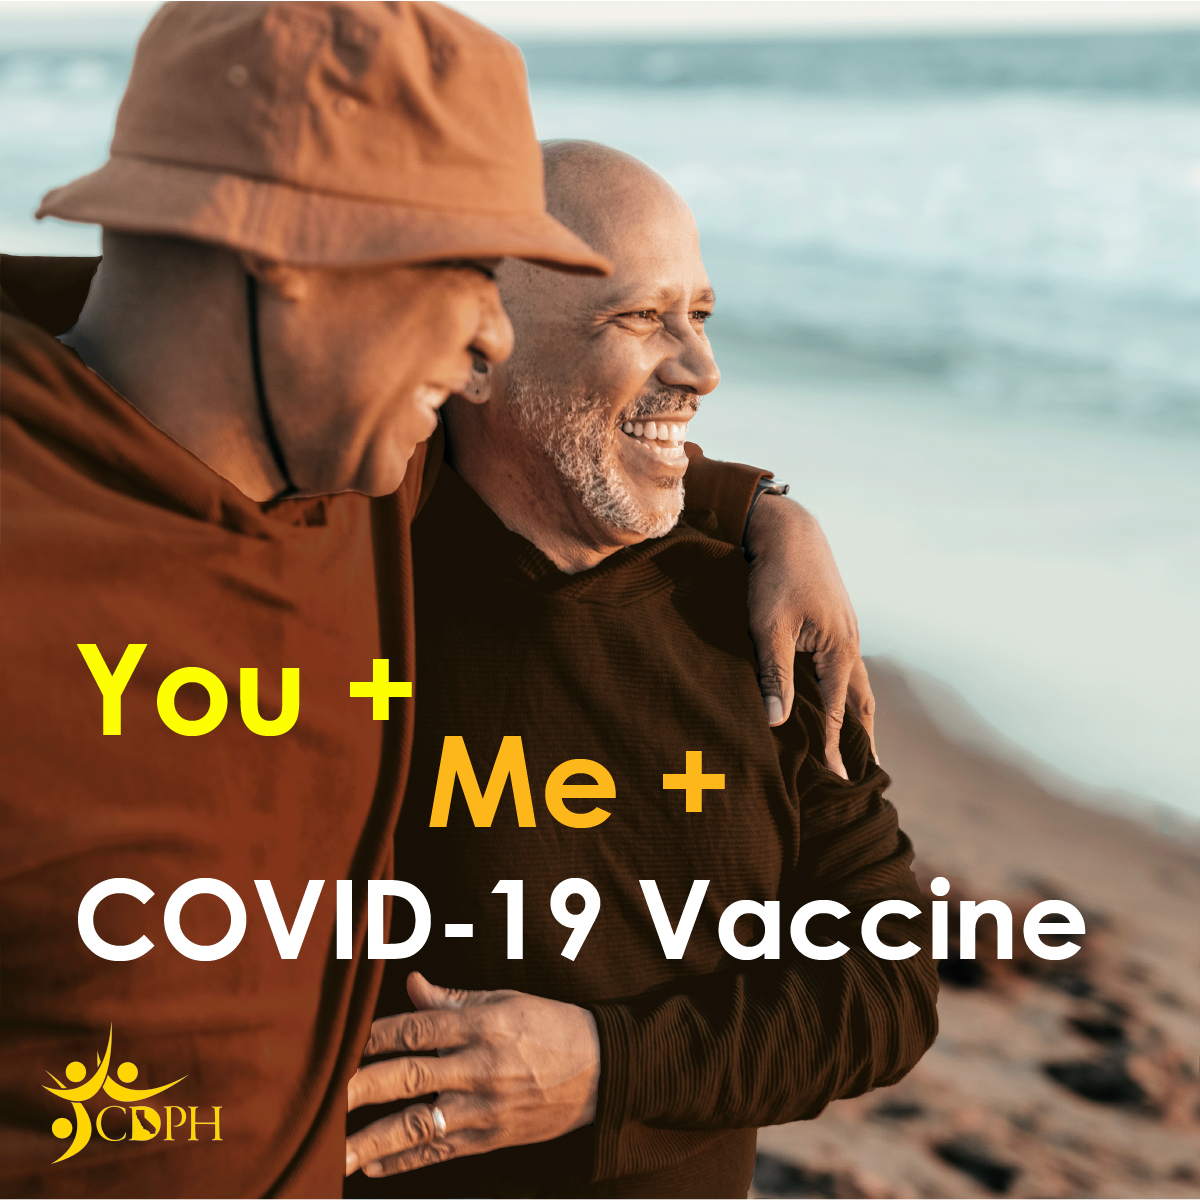 You + Me + COVID-19 Vaccine = safe travels